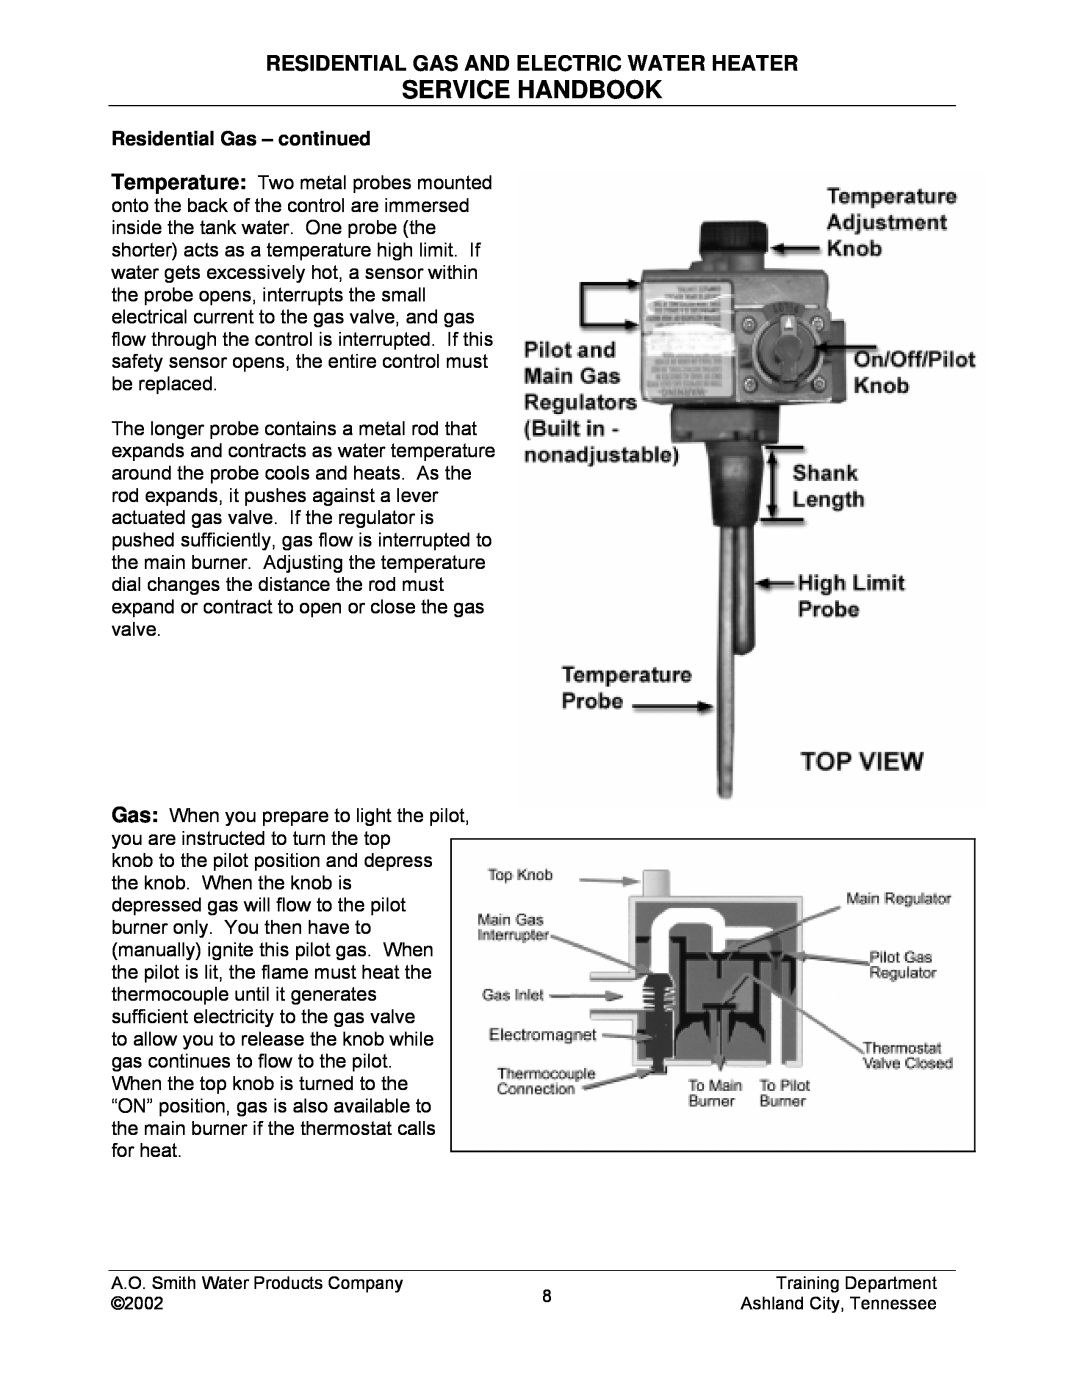 A.O. Smith TC-049-R2 manual Service Handbook, Residential Gas And Electric Water Heater 